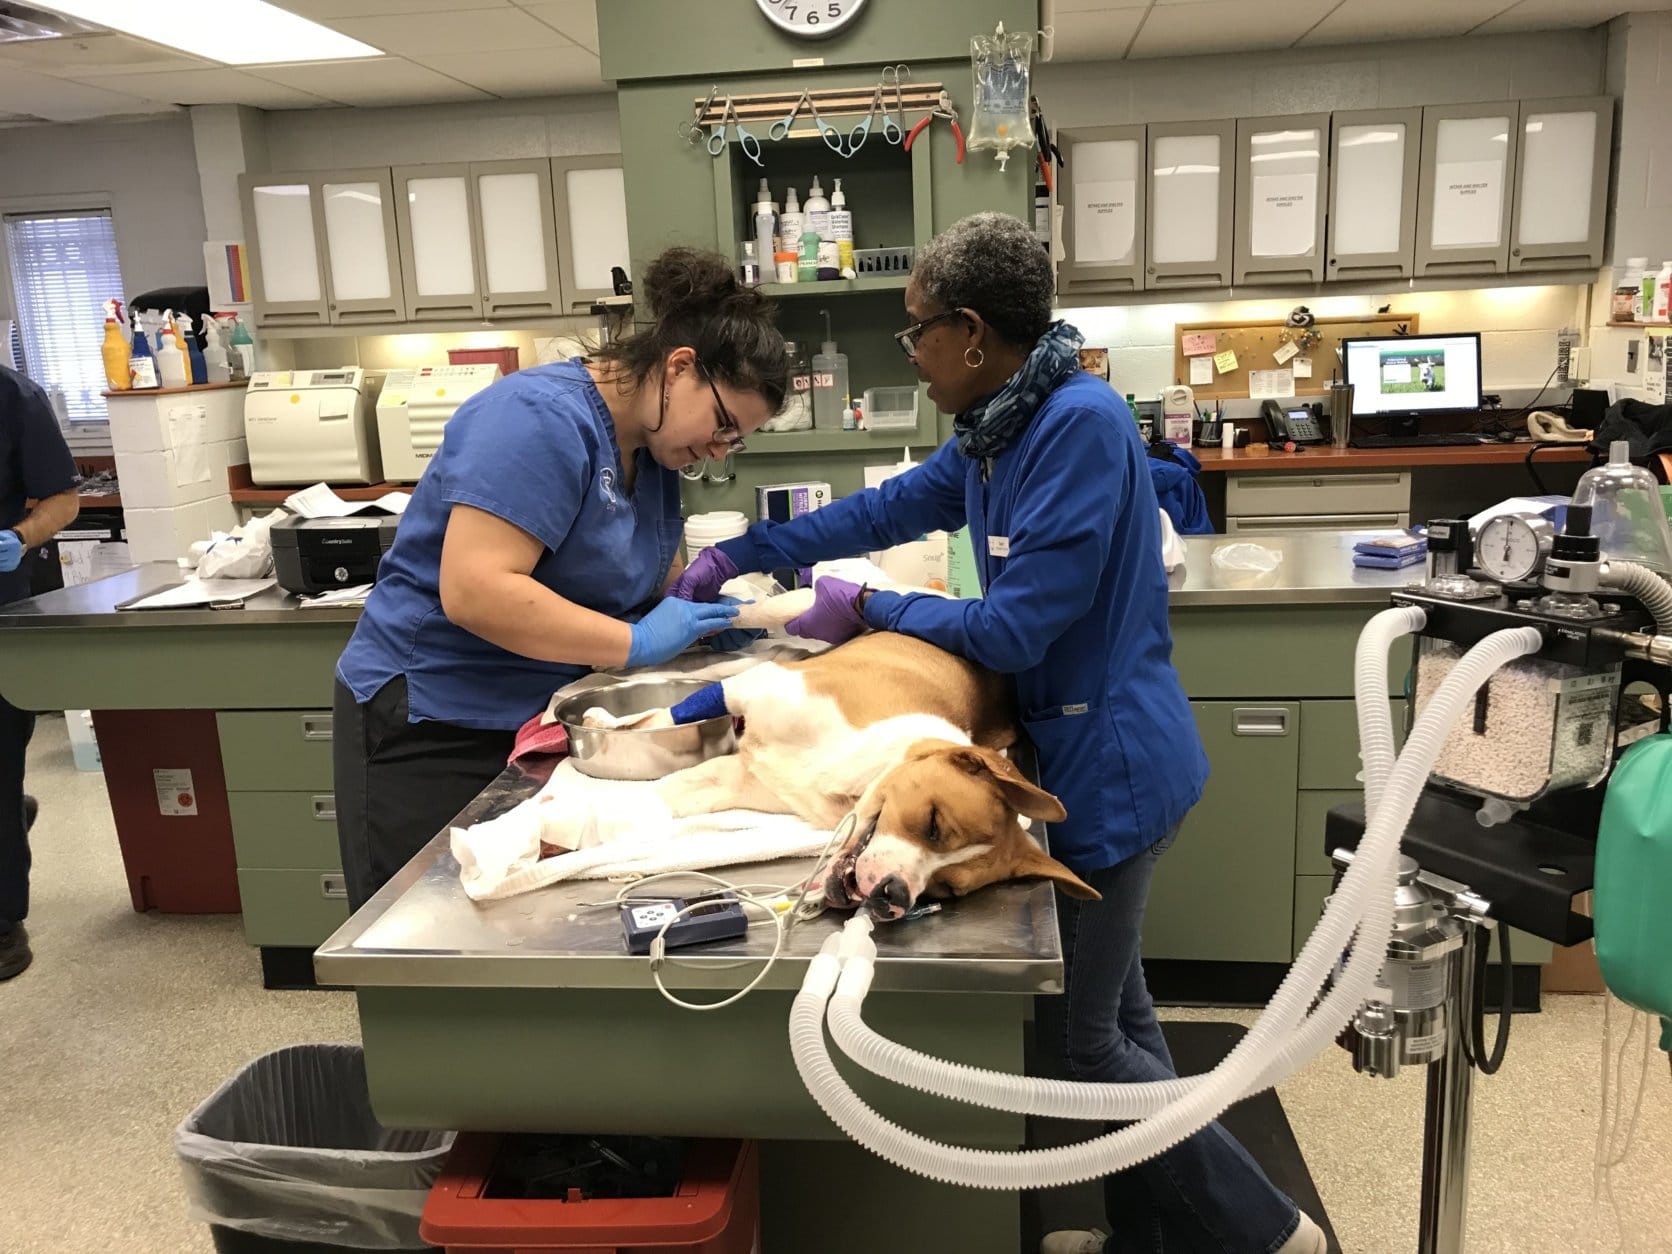 The dog had injuries to all four legs; when it was brought in for medical treatment, one of its digits had to be amputated and a leg may also need to be amputated. (Courtesy Humane Rescue Alliance)